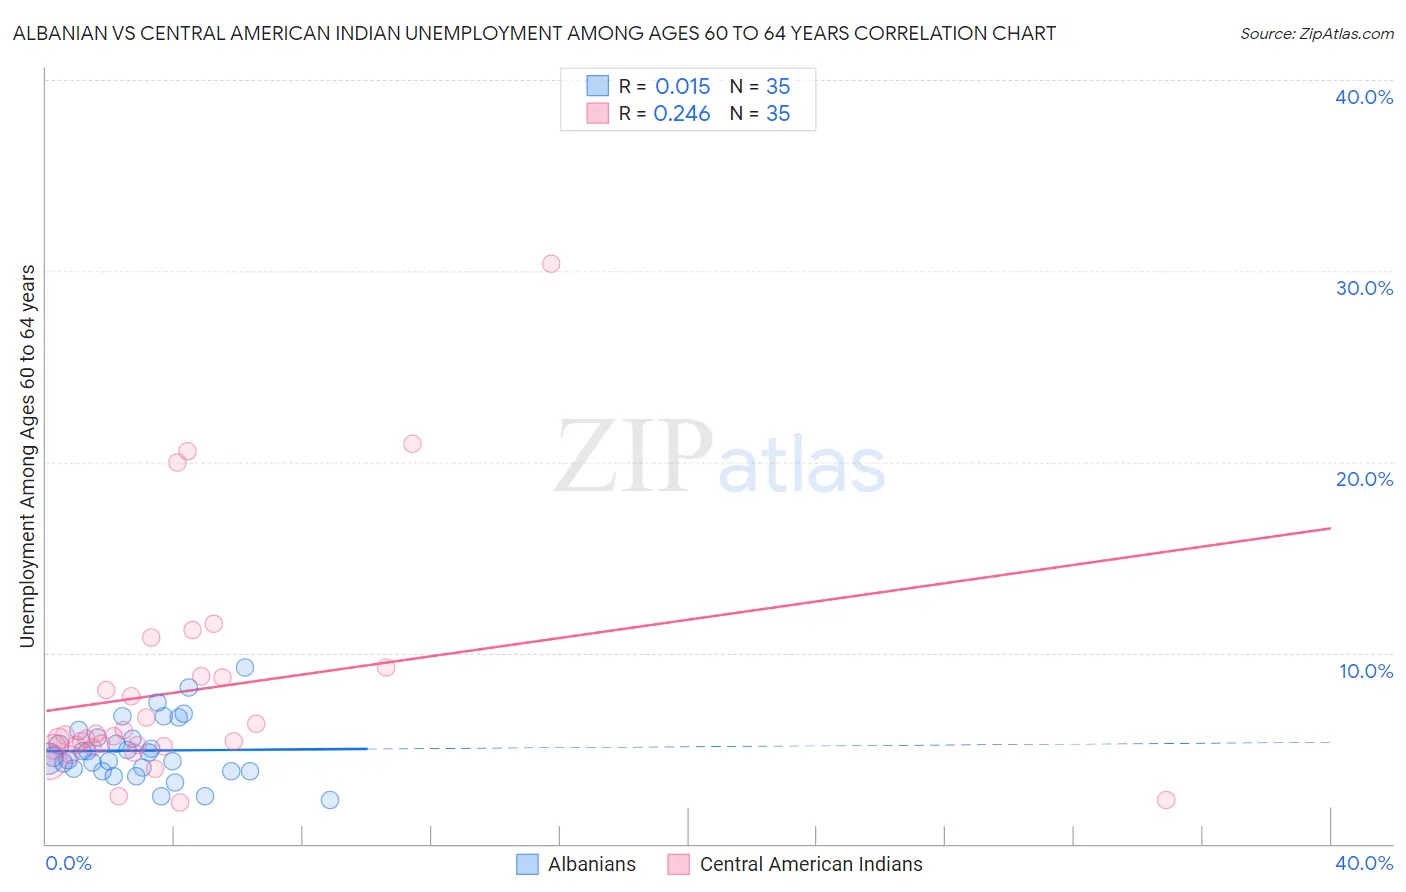 Albanian vs Central American Indian Unemployment Among Ages 60 to 64 years